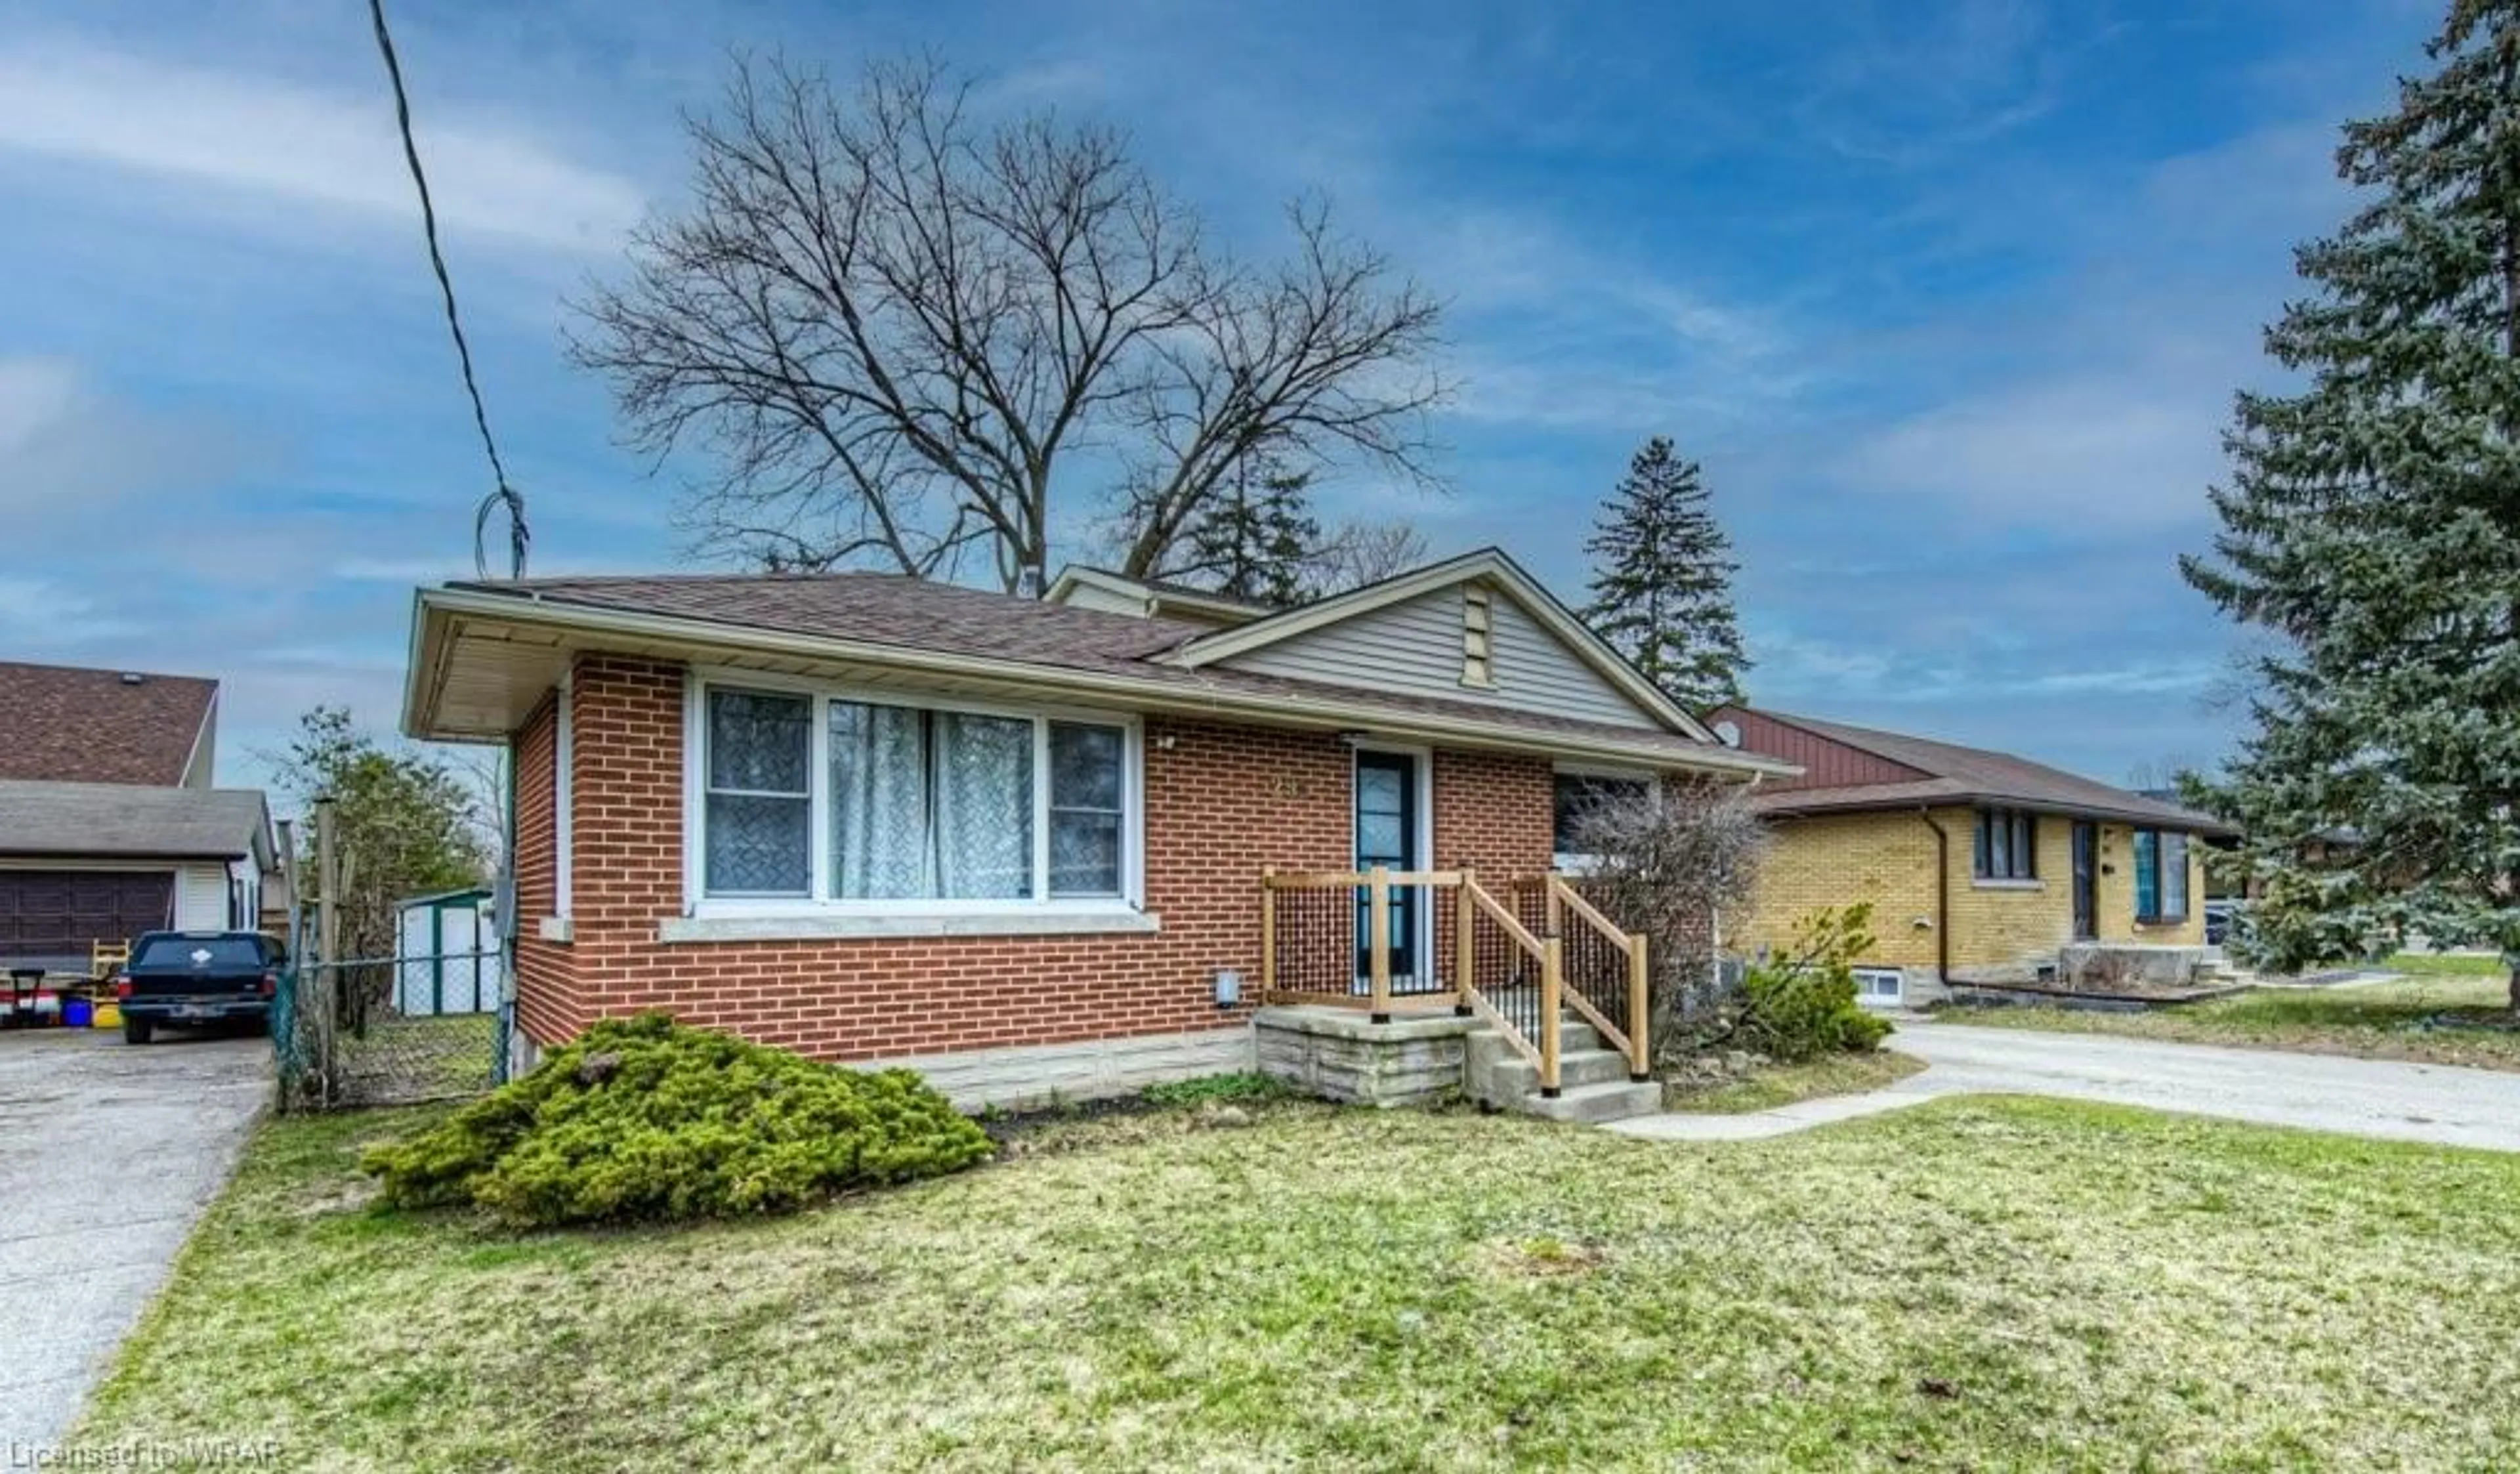 Home with brick exterior material for 295 Connaught St, Kitchener Ontario N2C 1B5